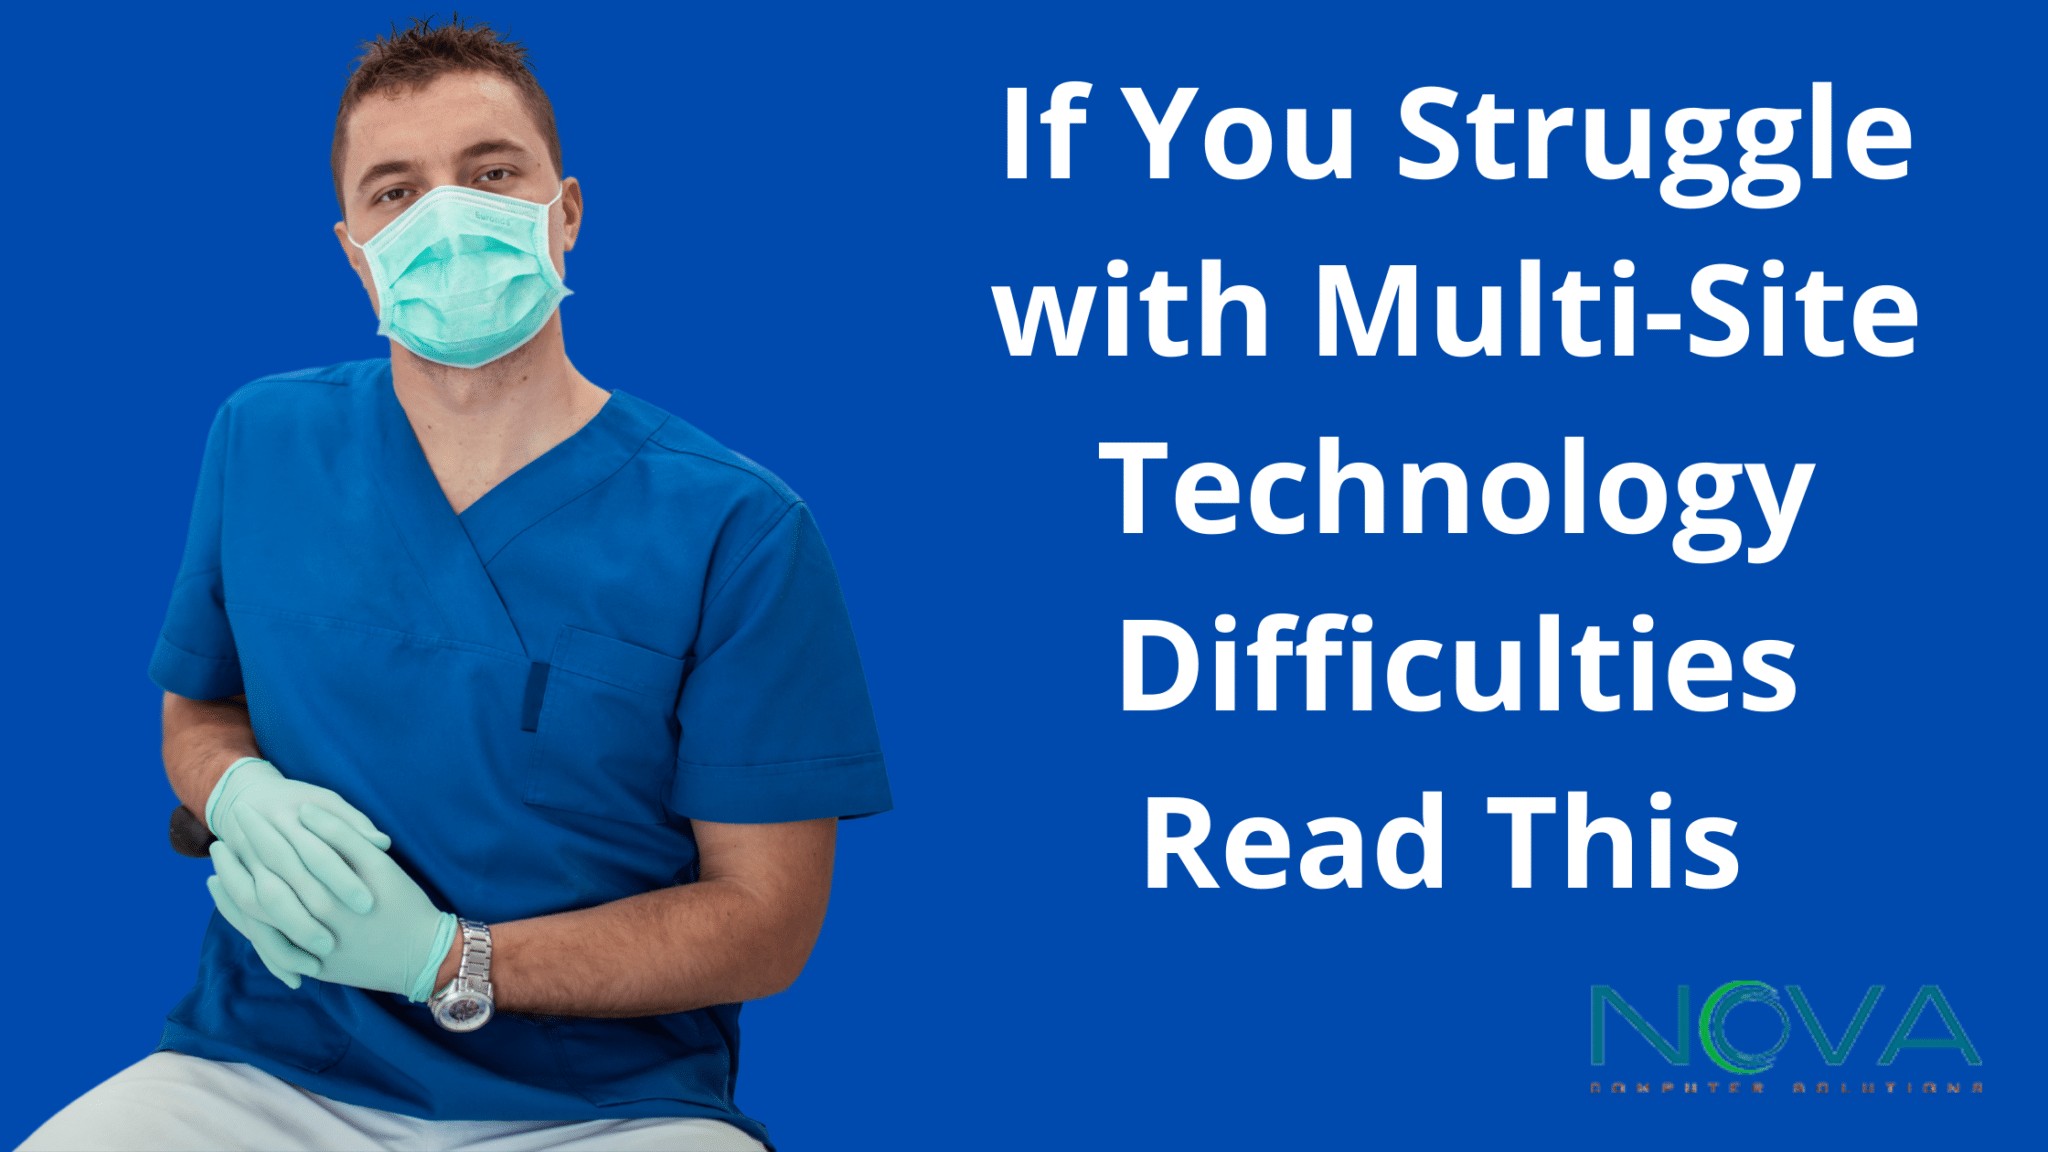 If You Struggle with Multi-Site Technology Difficulties, Read This 